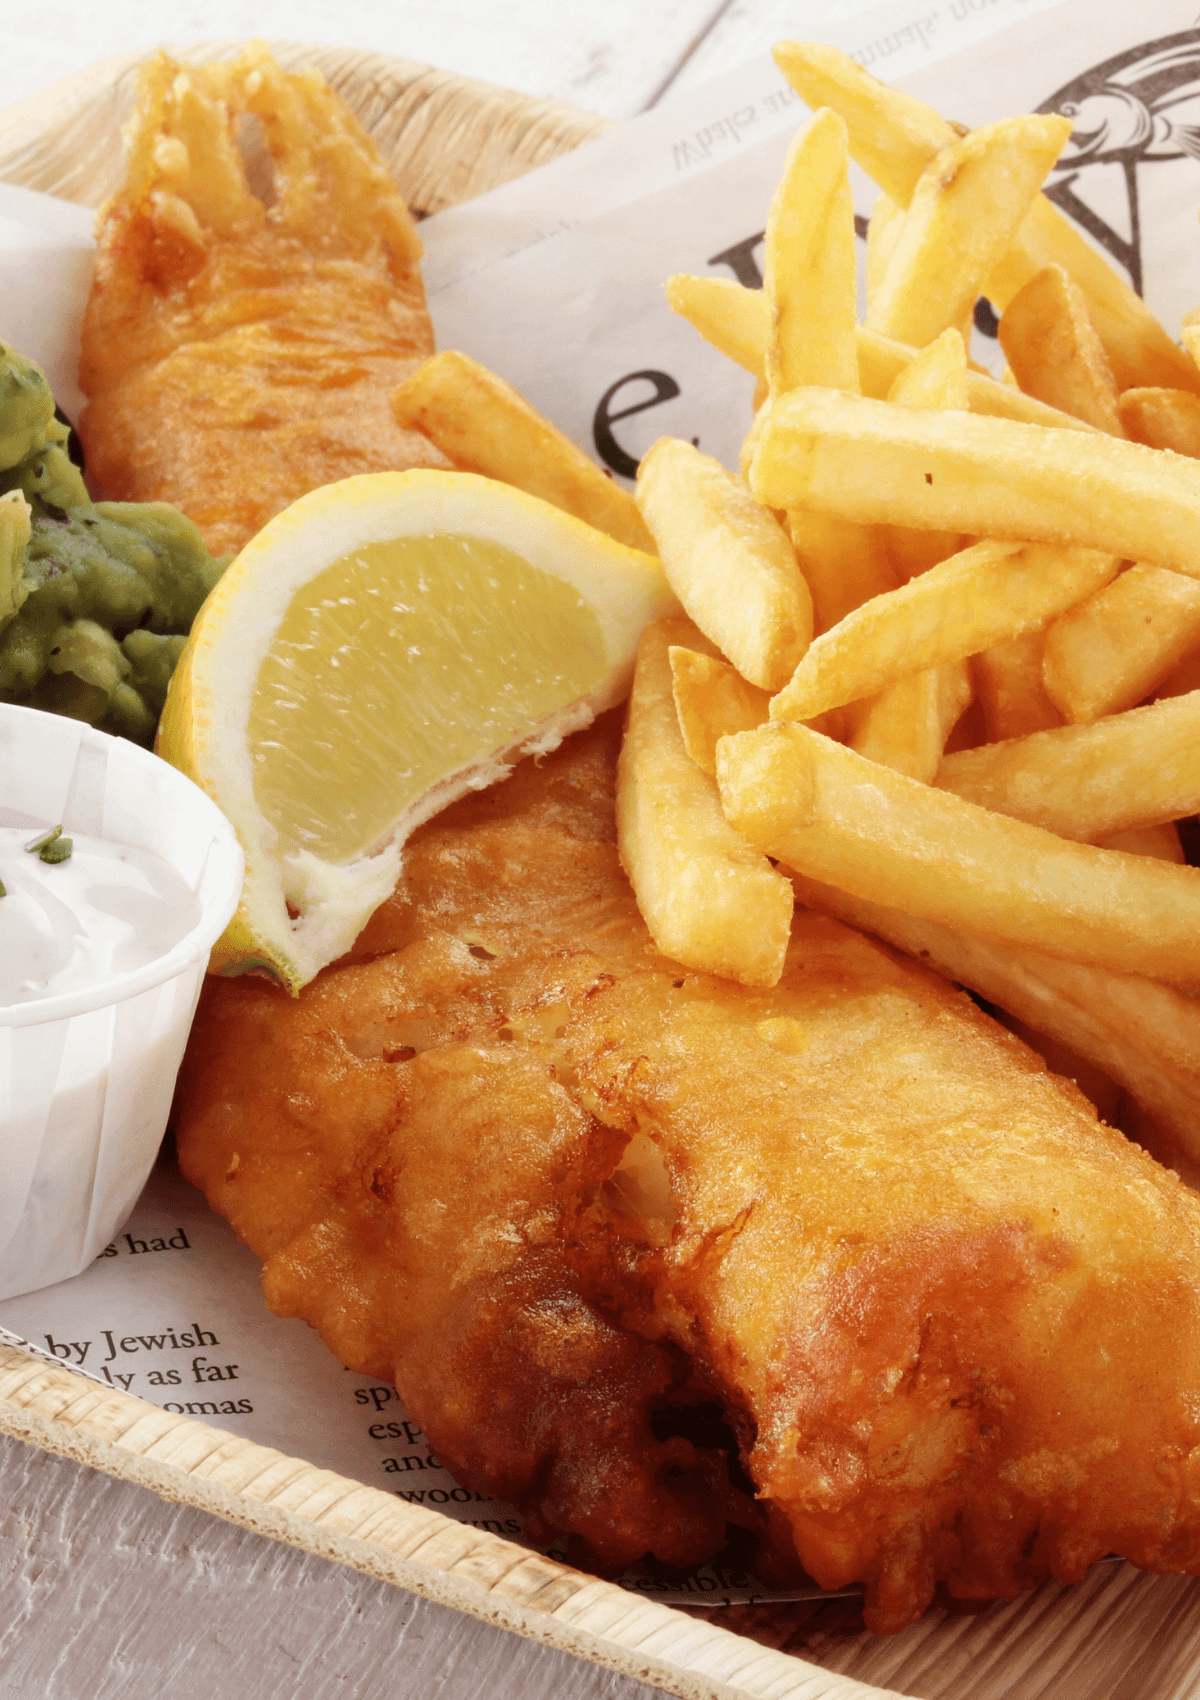 Fish and chips 